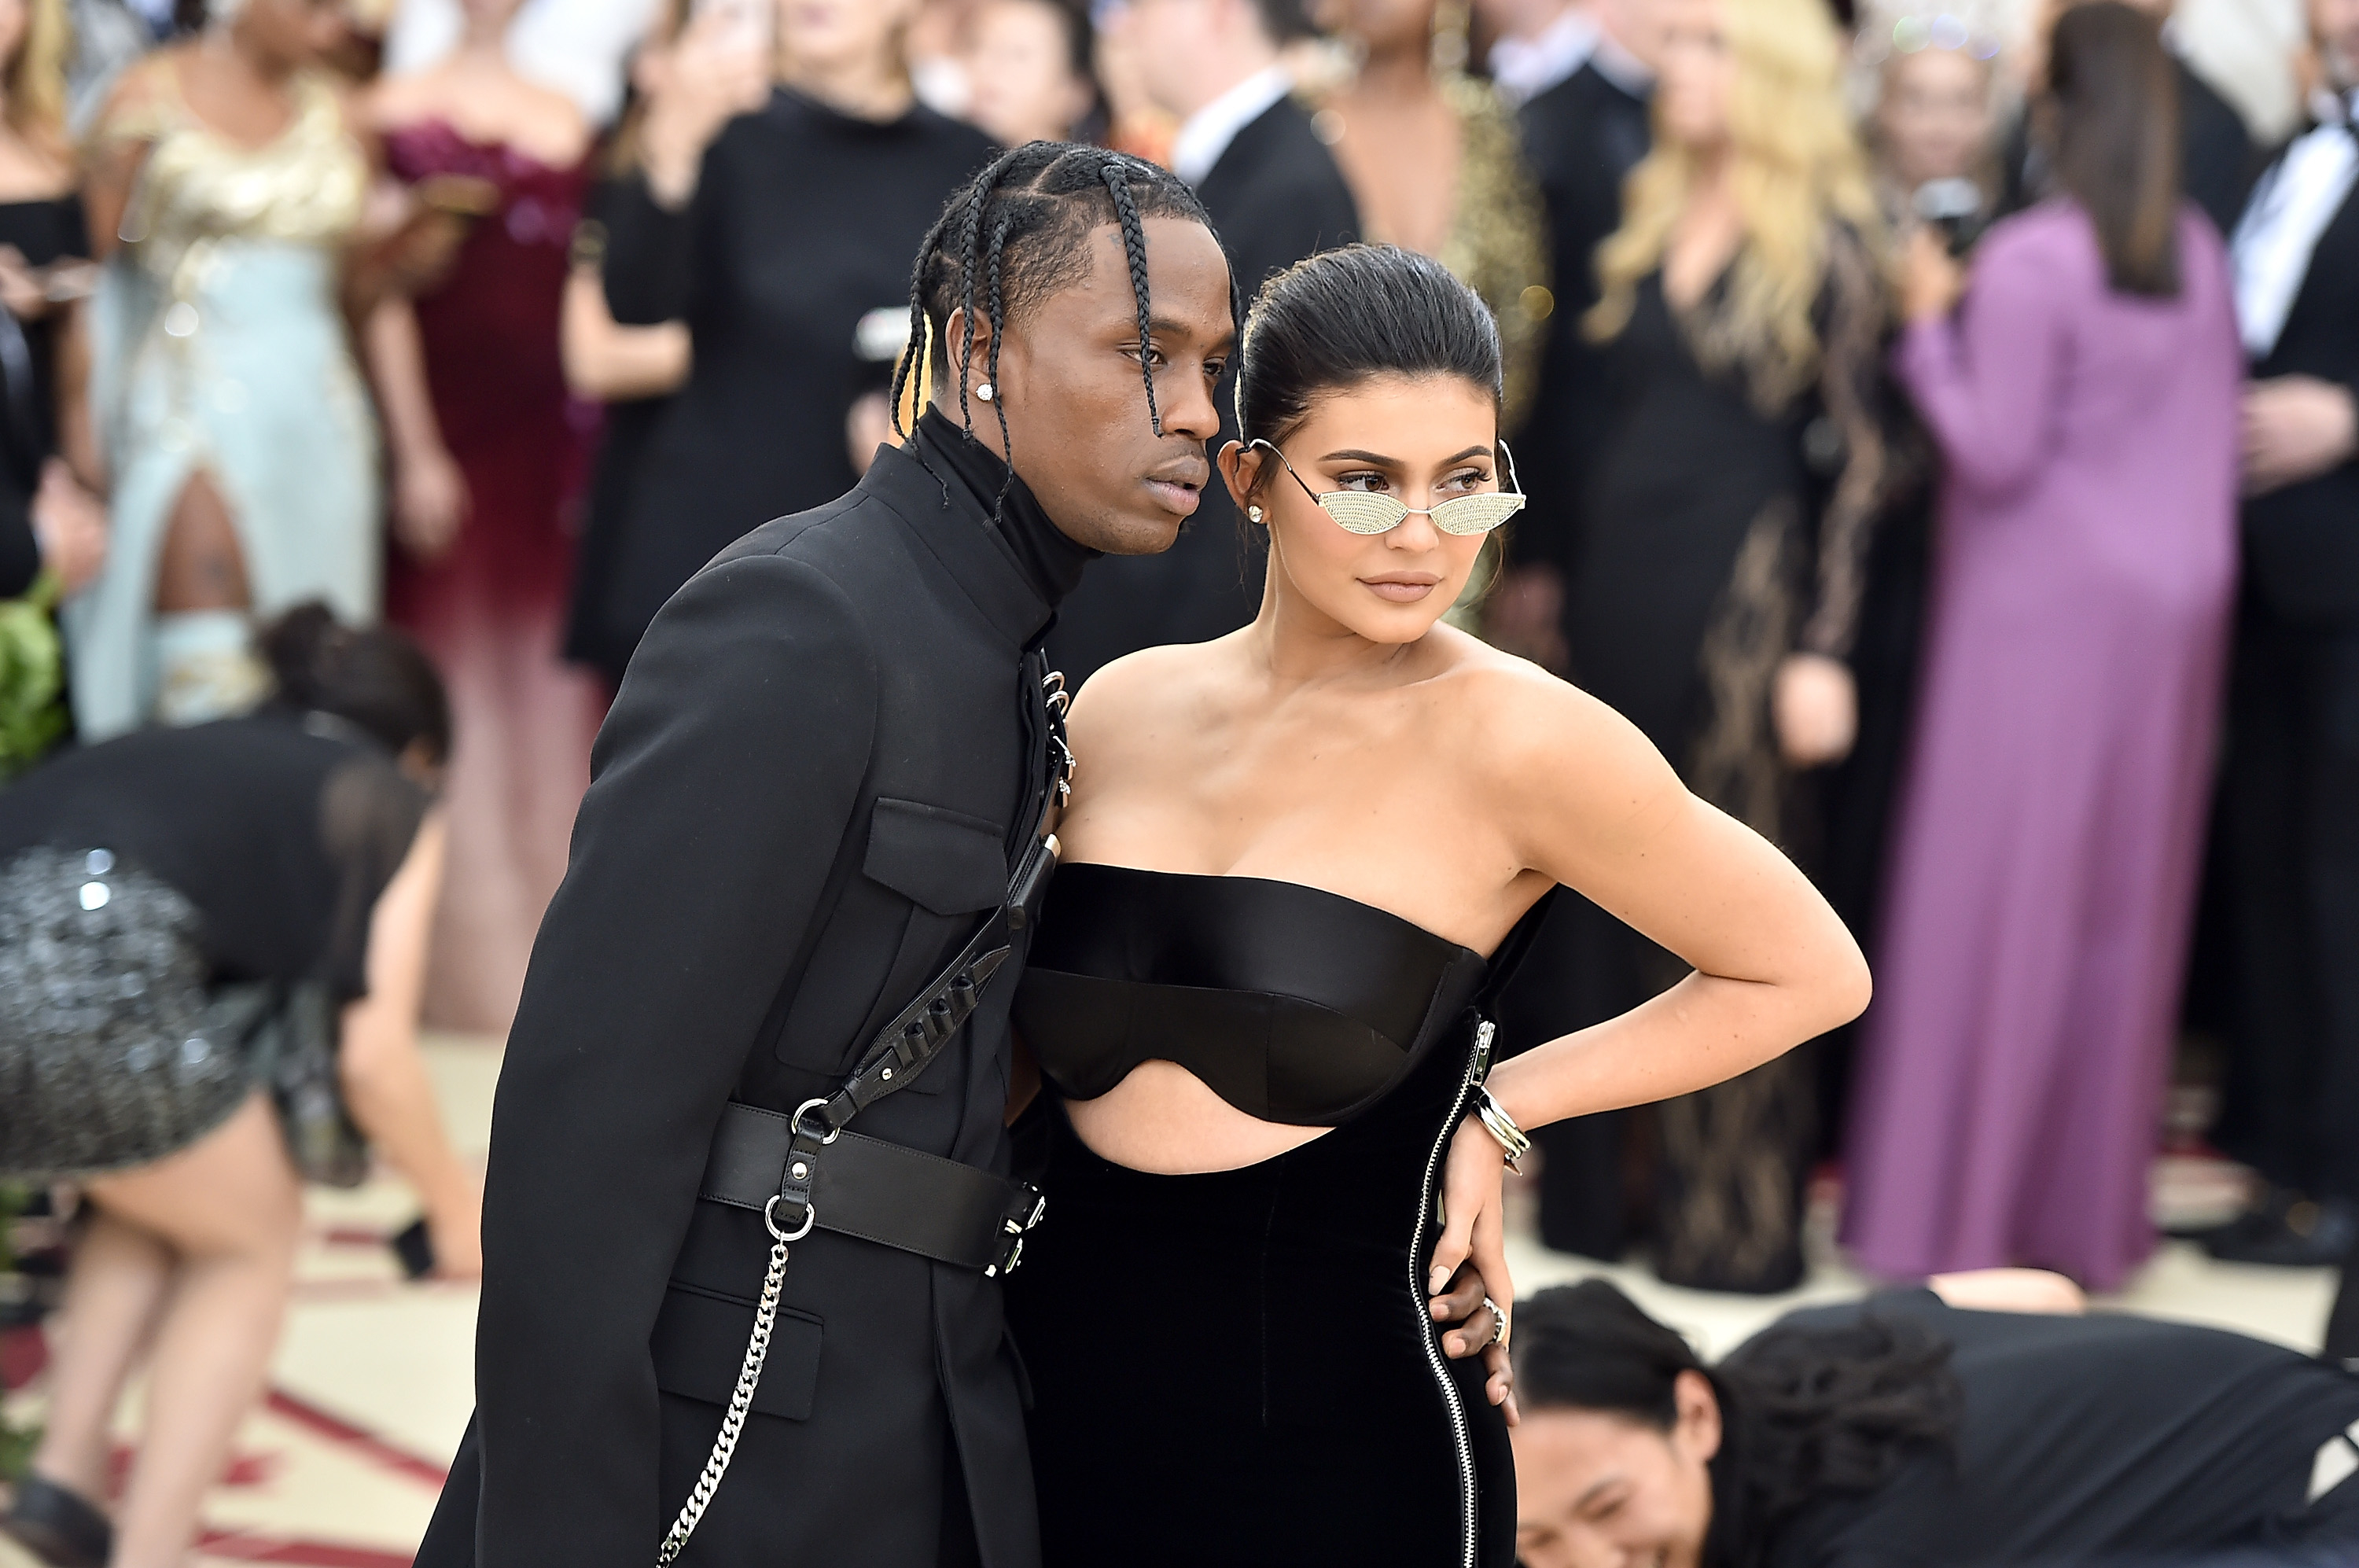 Travis Scott and Kylie Jenner pose together; he in a suit, she in a structured strapless gown